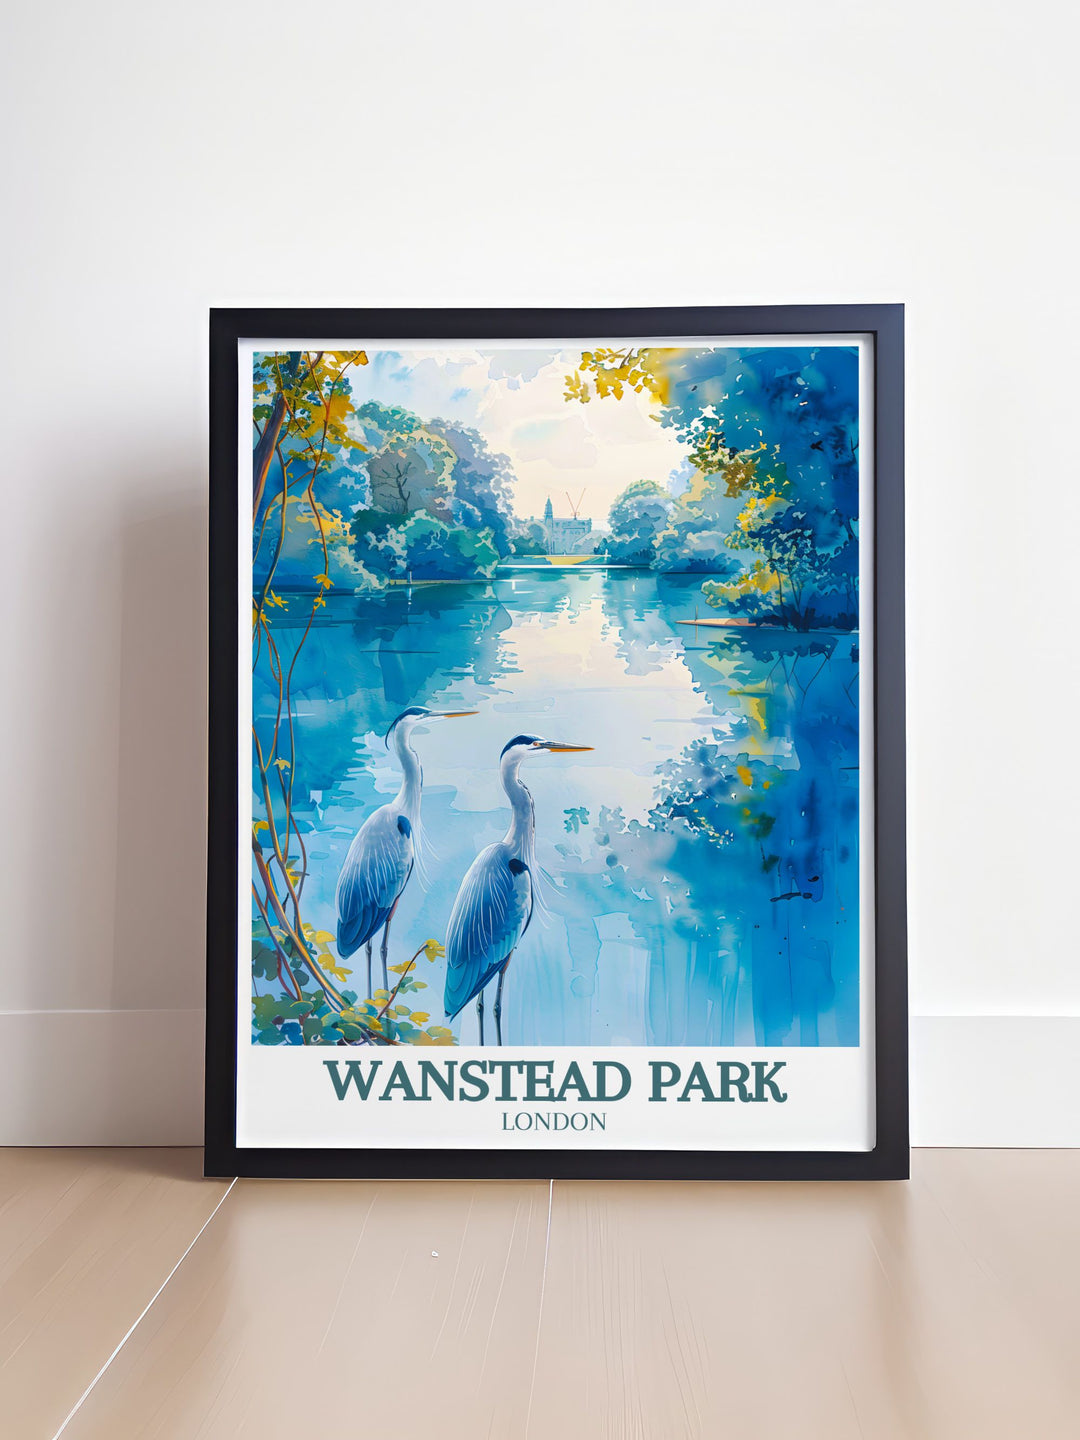 Stunning Wanstead Park prints showcasing the parks beautiful scenery and tranquil environment. These prints make an excellent addition to any art collection or home decor, providing a window into the serene landscapes of East London.